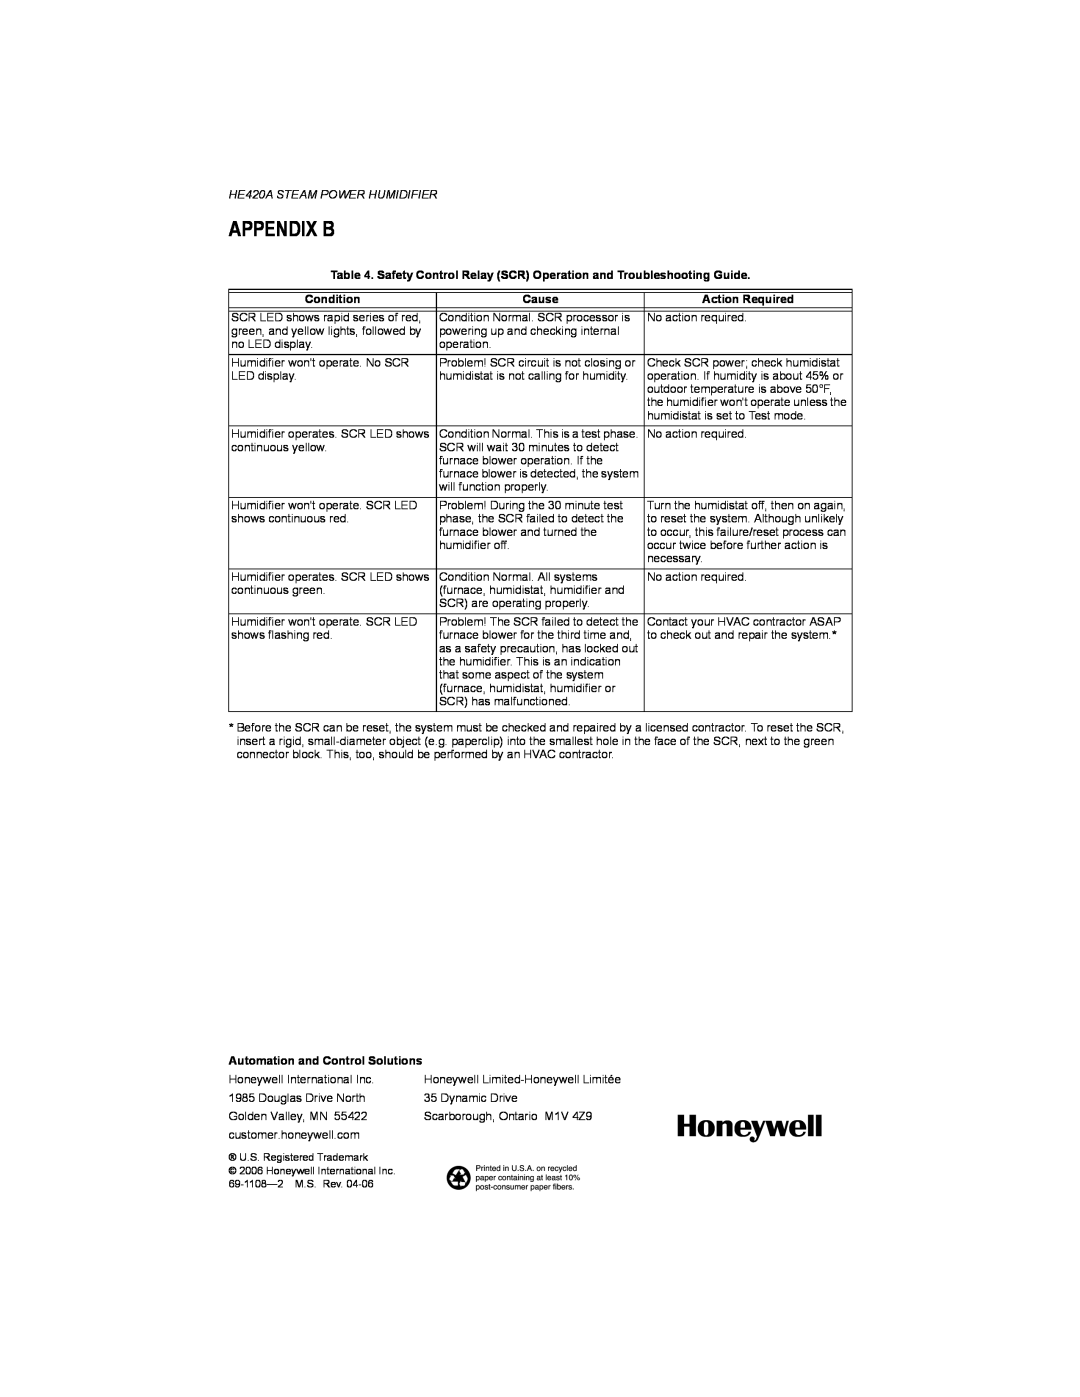 Honeywell installation instructions Appendix B, Condition, Cause, Action Required, HE420A STEAM POWER HUMIDIFIER 